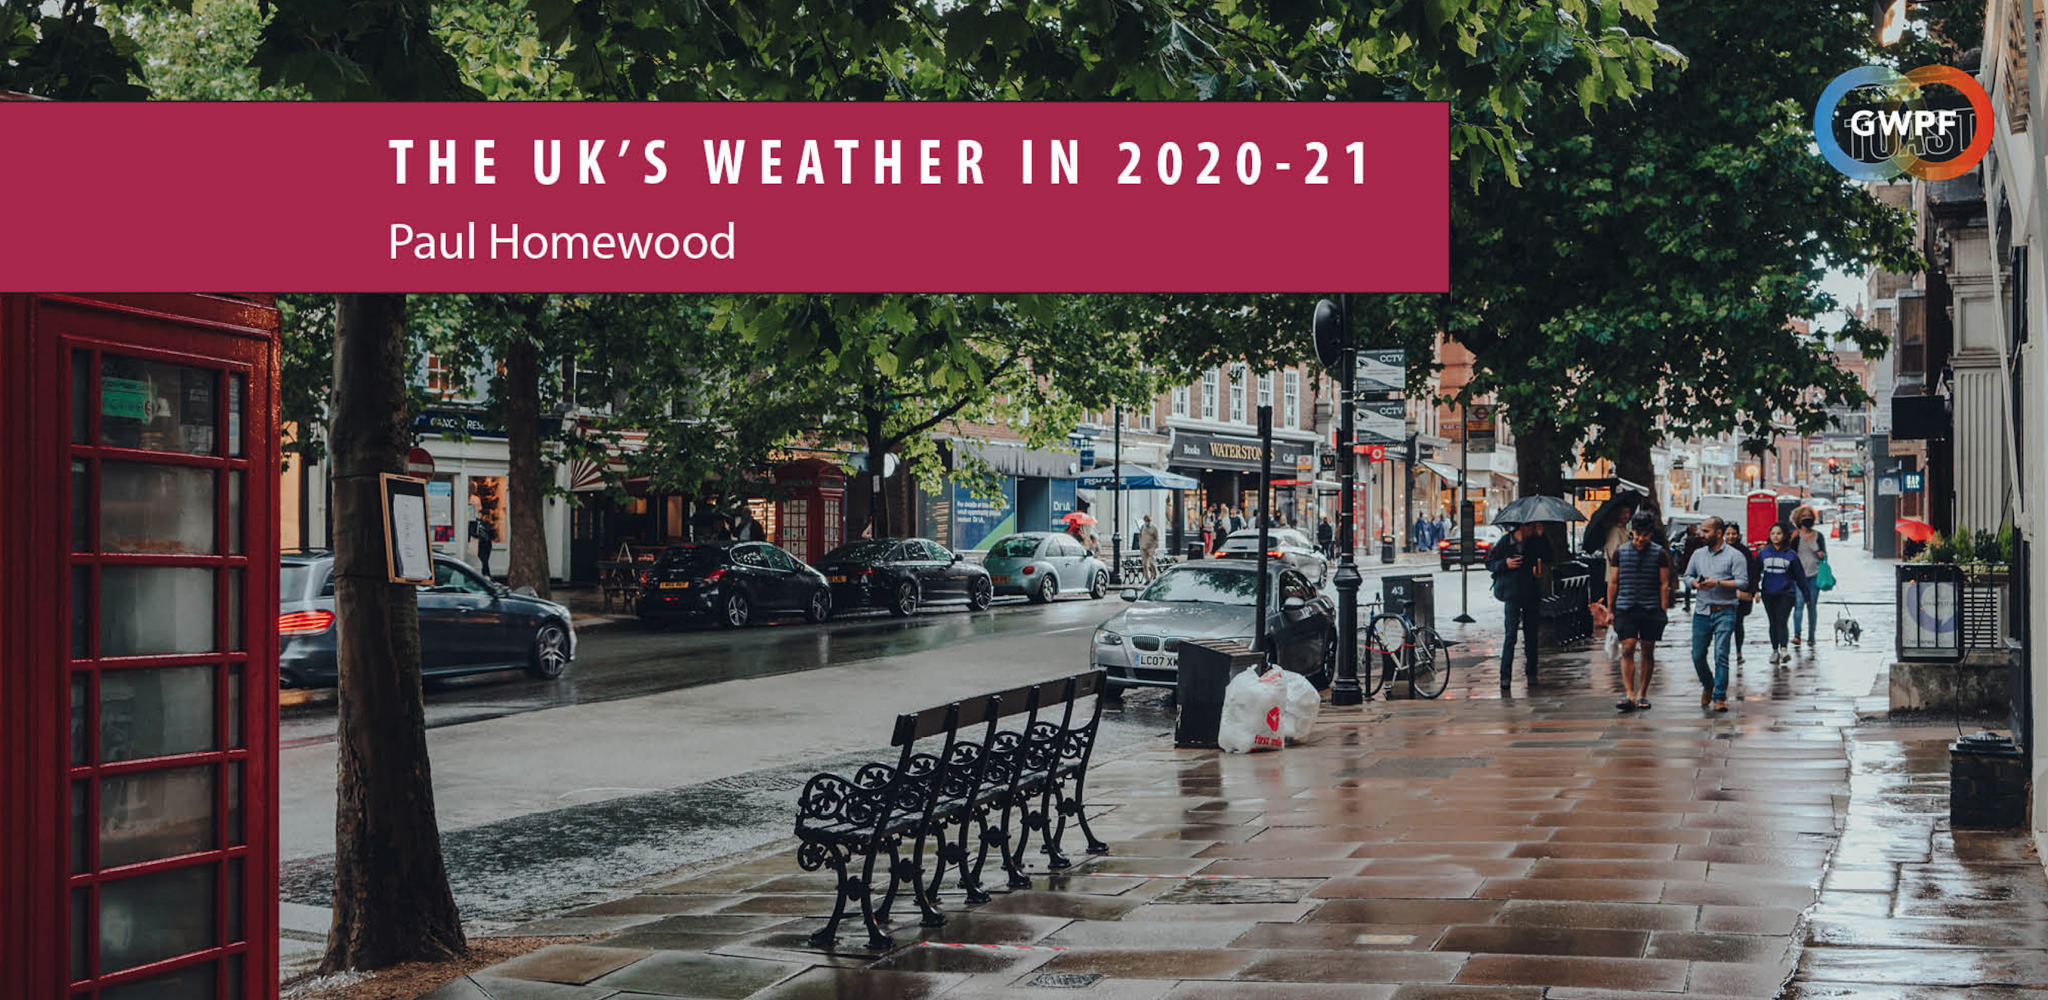 UK weather in 2020-21